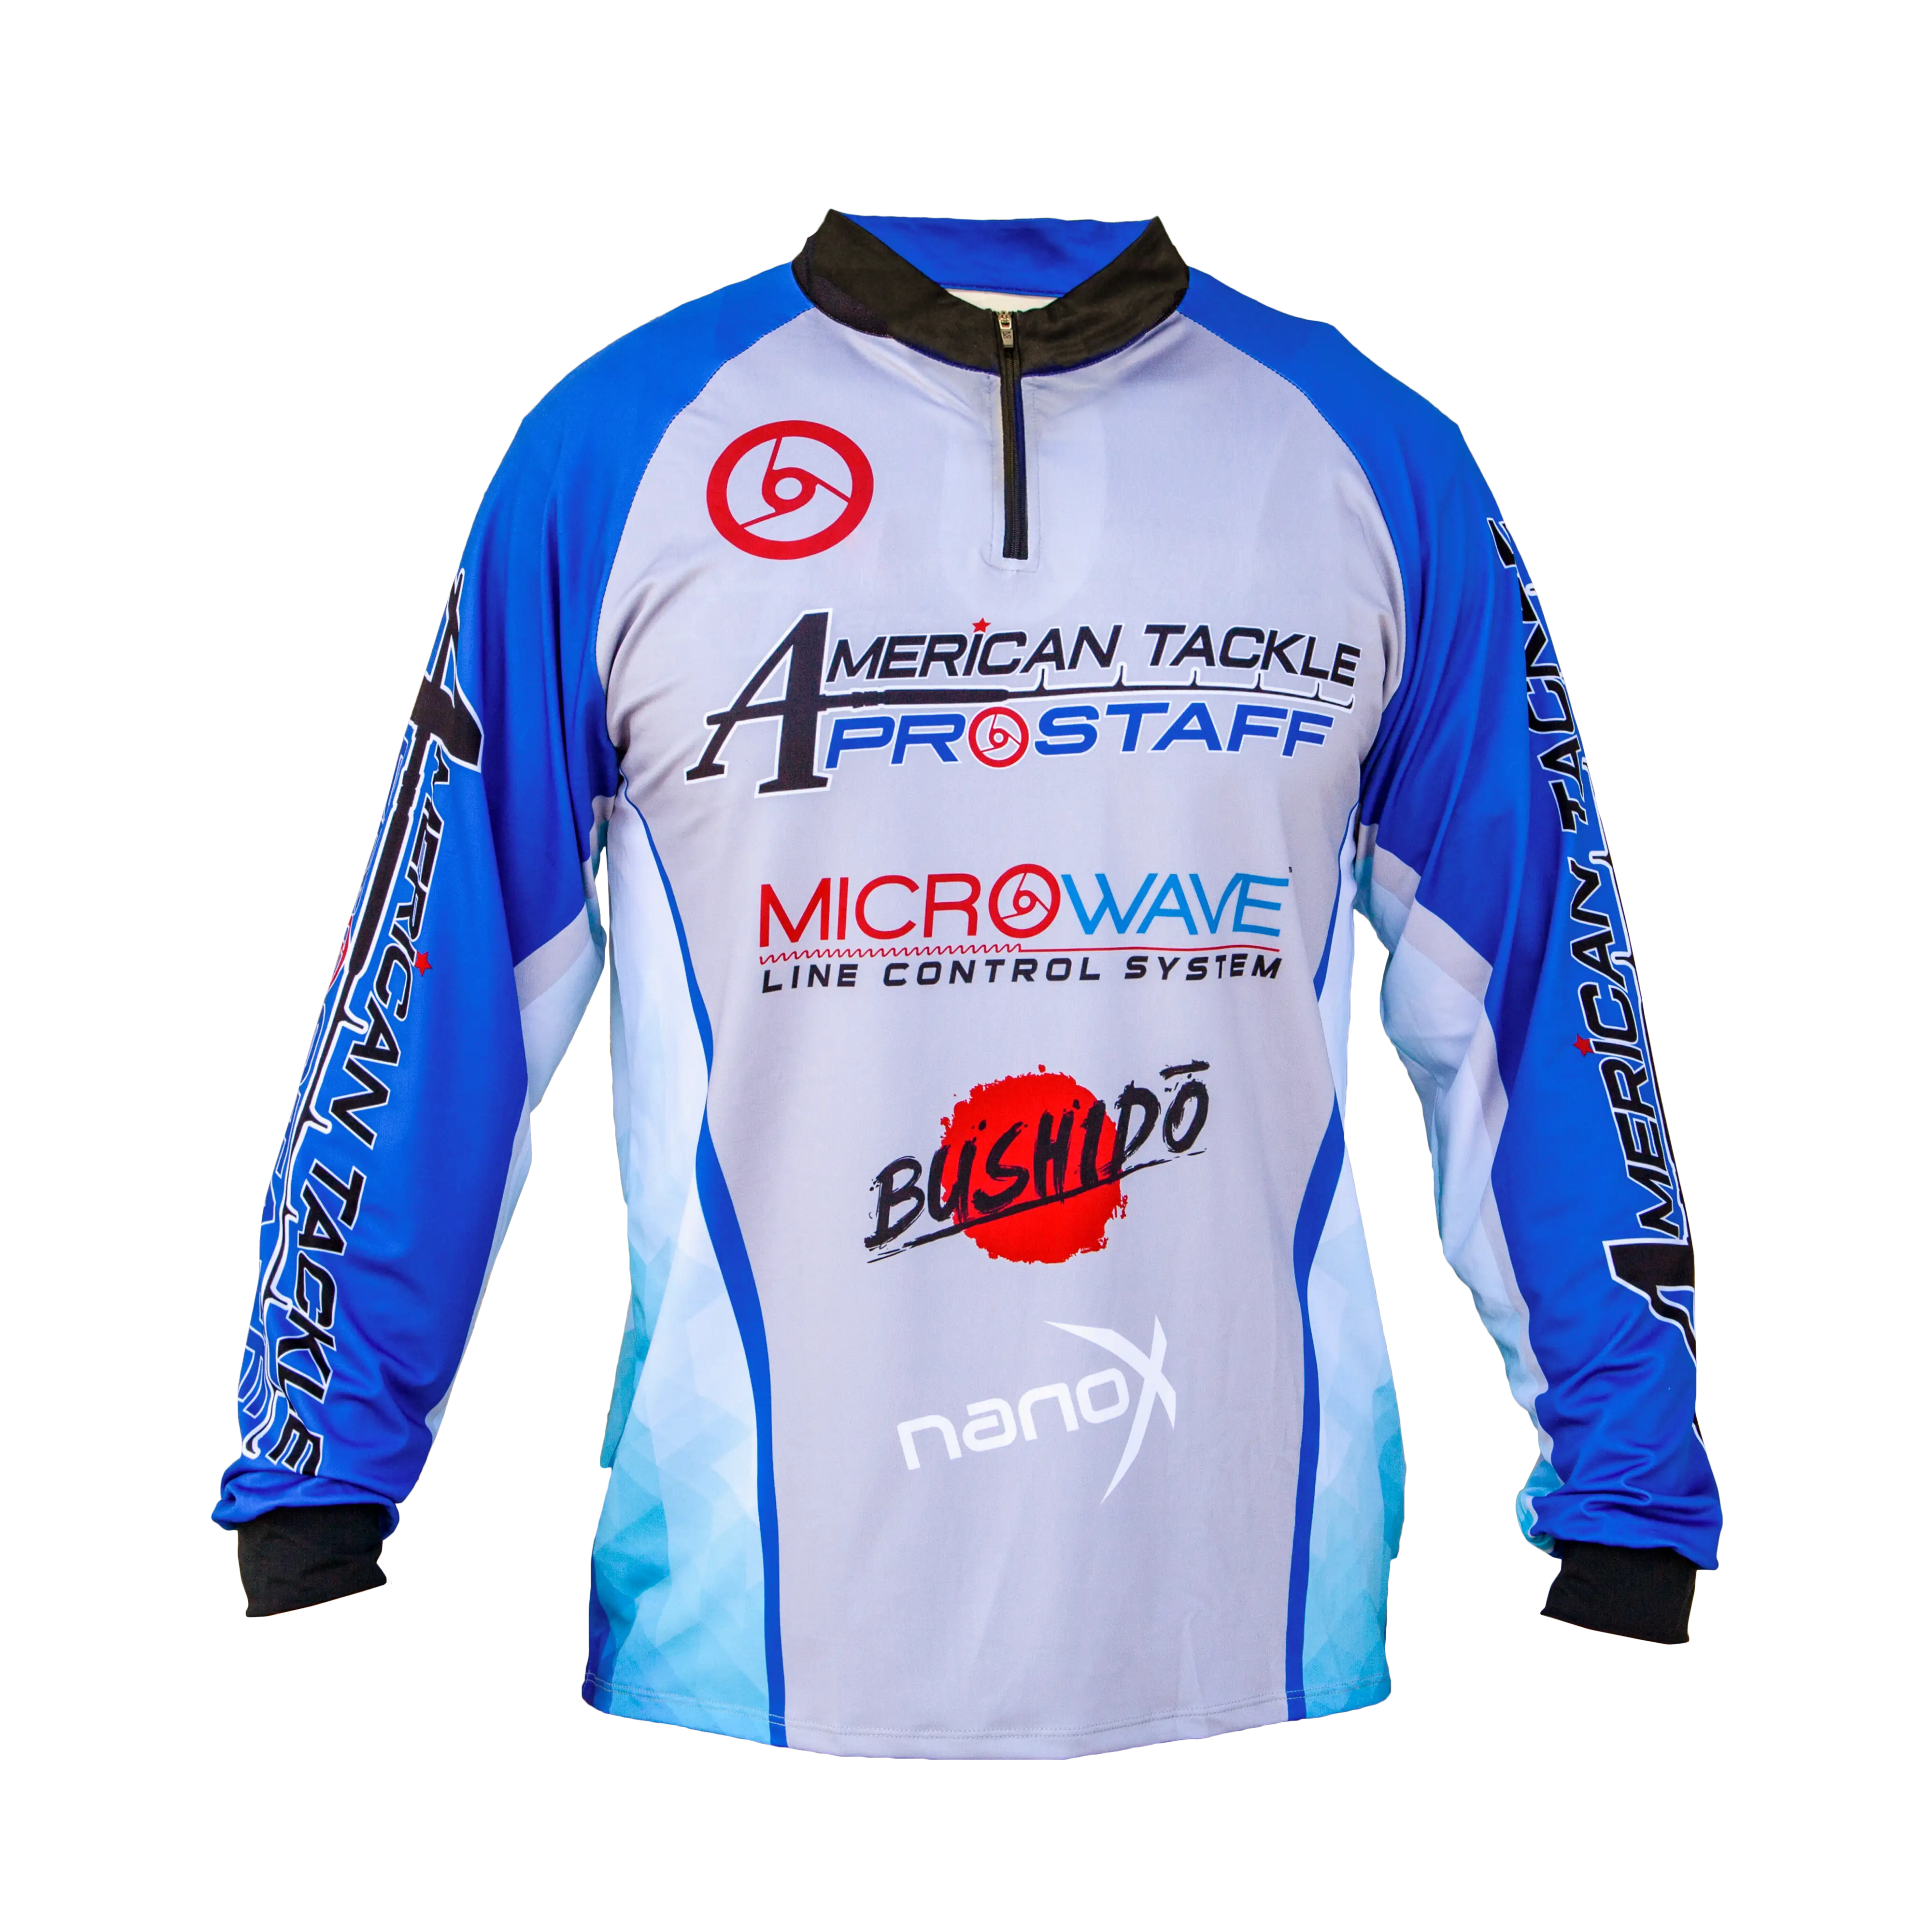 American Tackle ProStaff Jersey - Blue & Gray